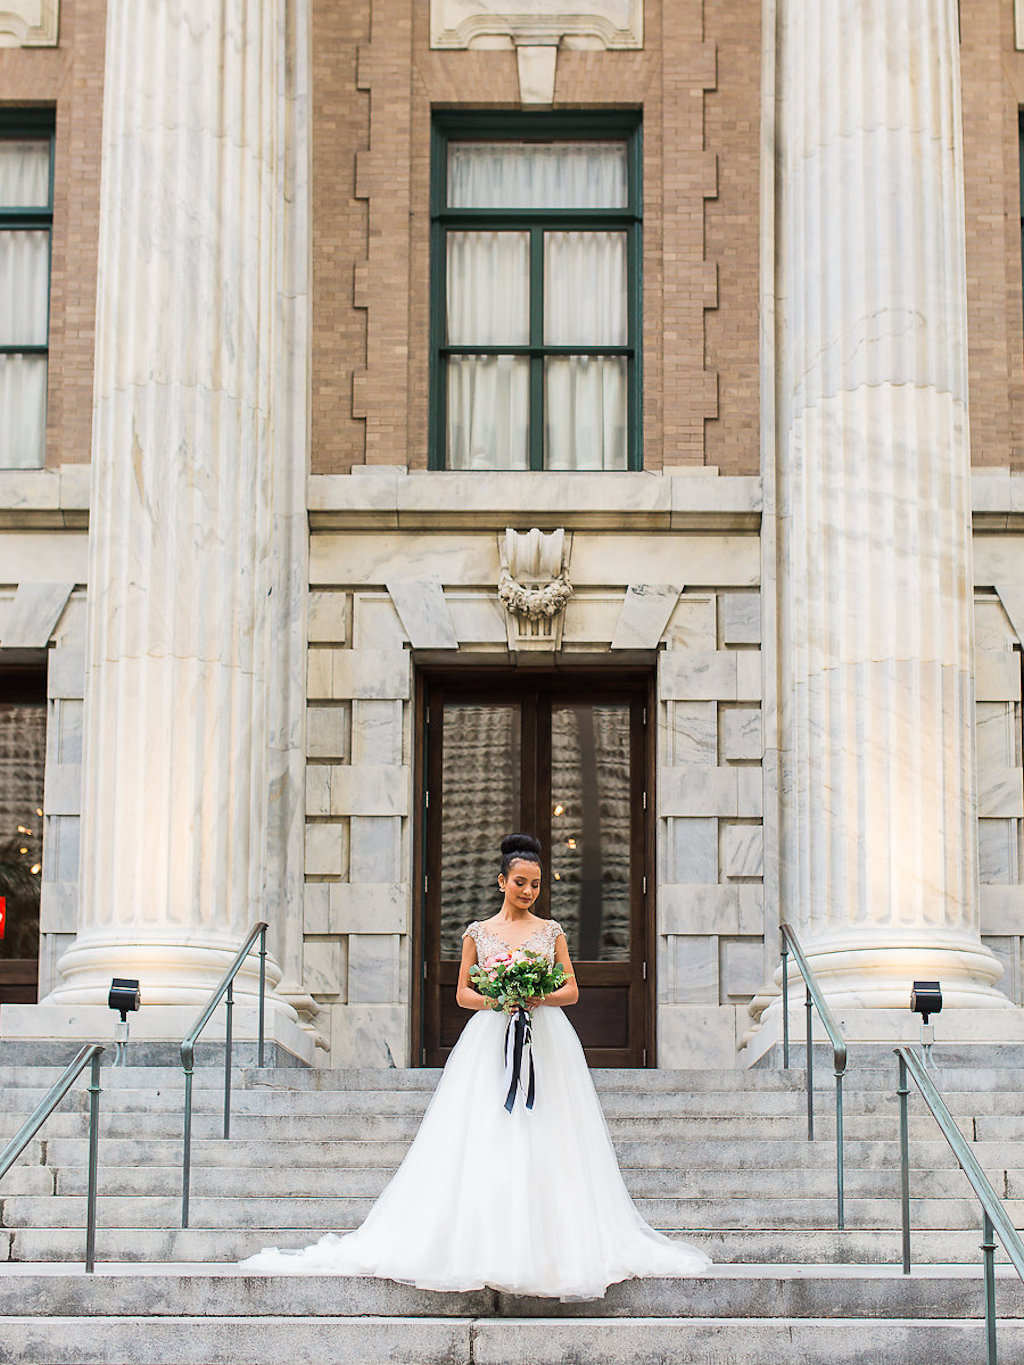 Outdoor Bridal Portrait in Ballgown Wedding Dress with Bouquet with Black Ribbon | Historic Downtown Tampa Hotel Wedding Venue Le Meridien